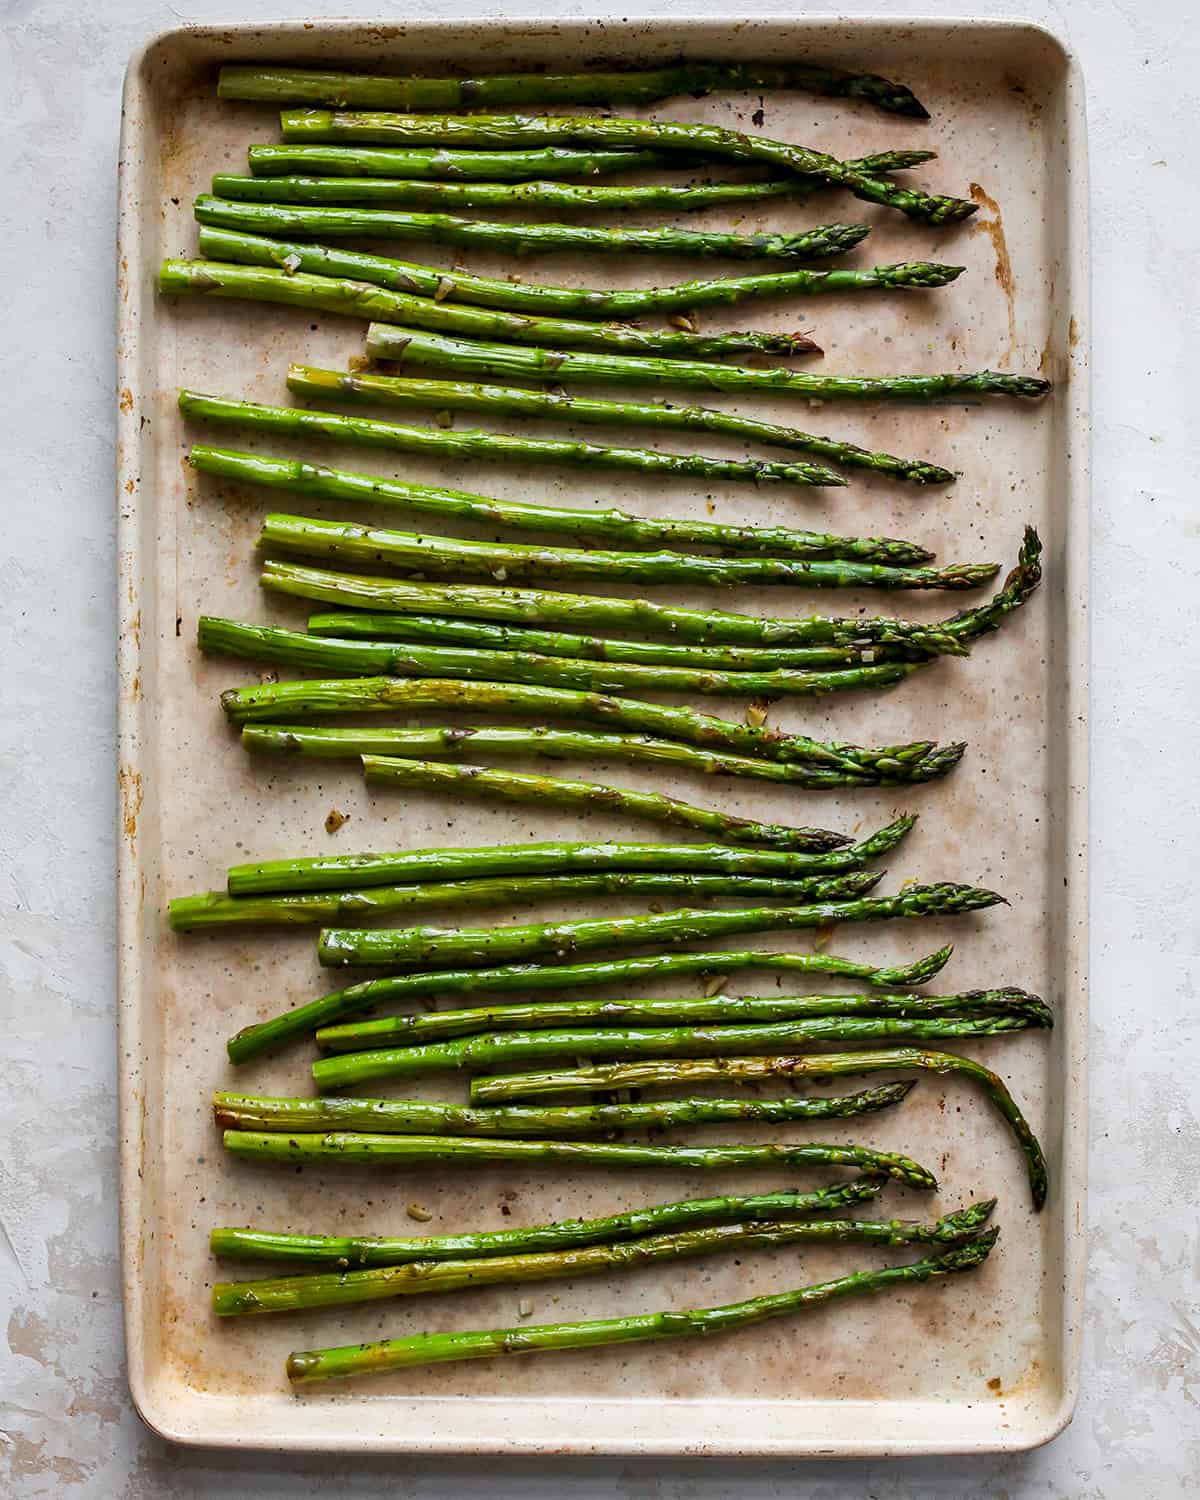 photo showing How to Roast Asparagus - asparagus on the baking sheet, roasted.